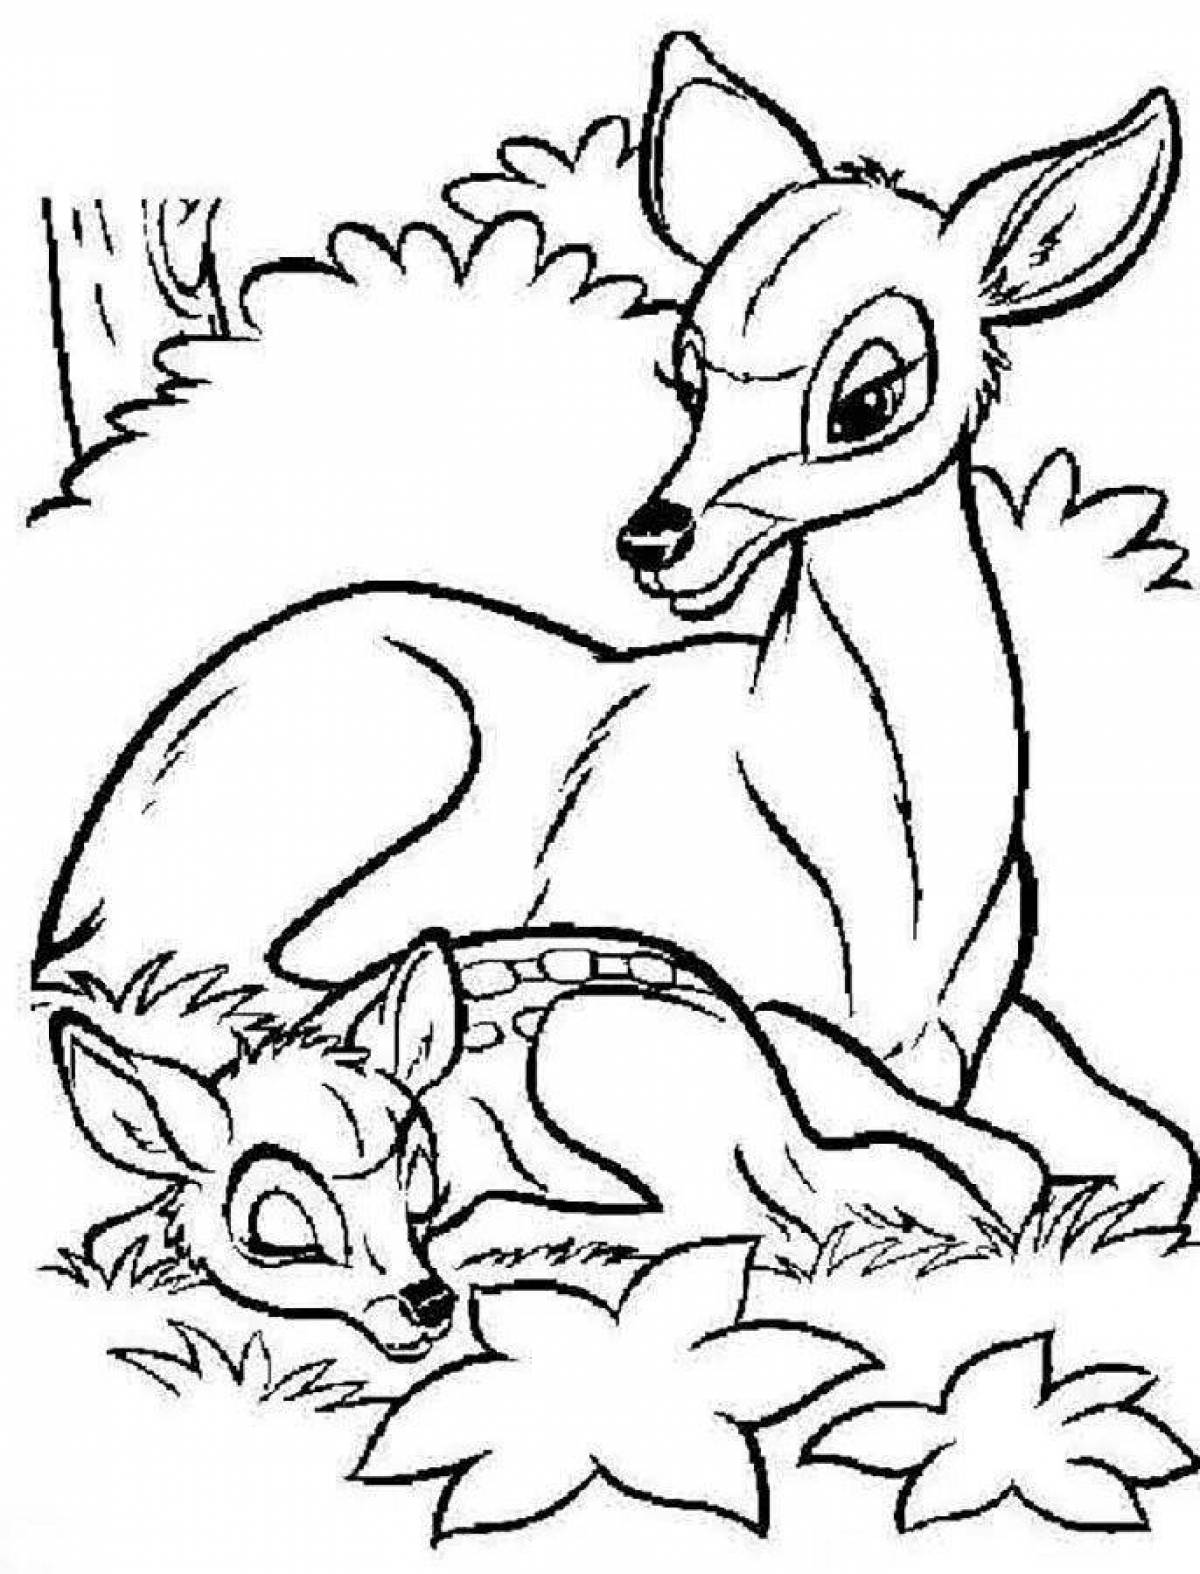 Brilliant bambi fawn coloring page